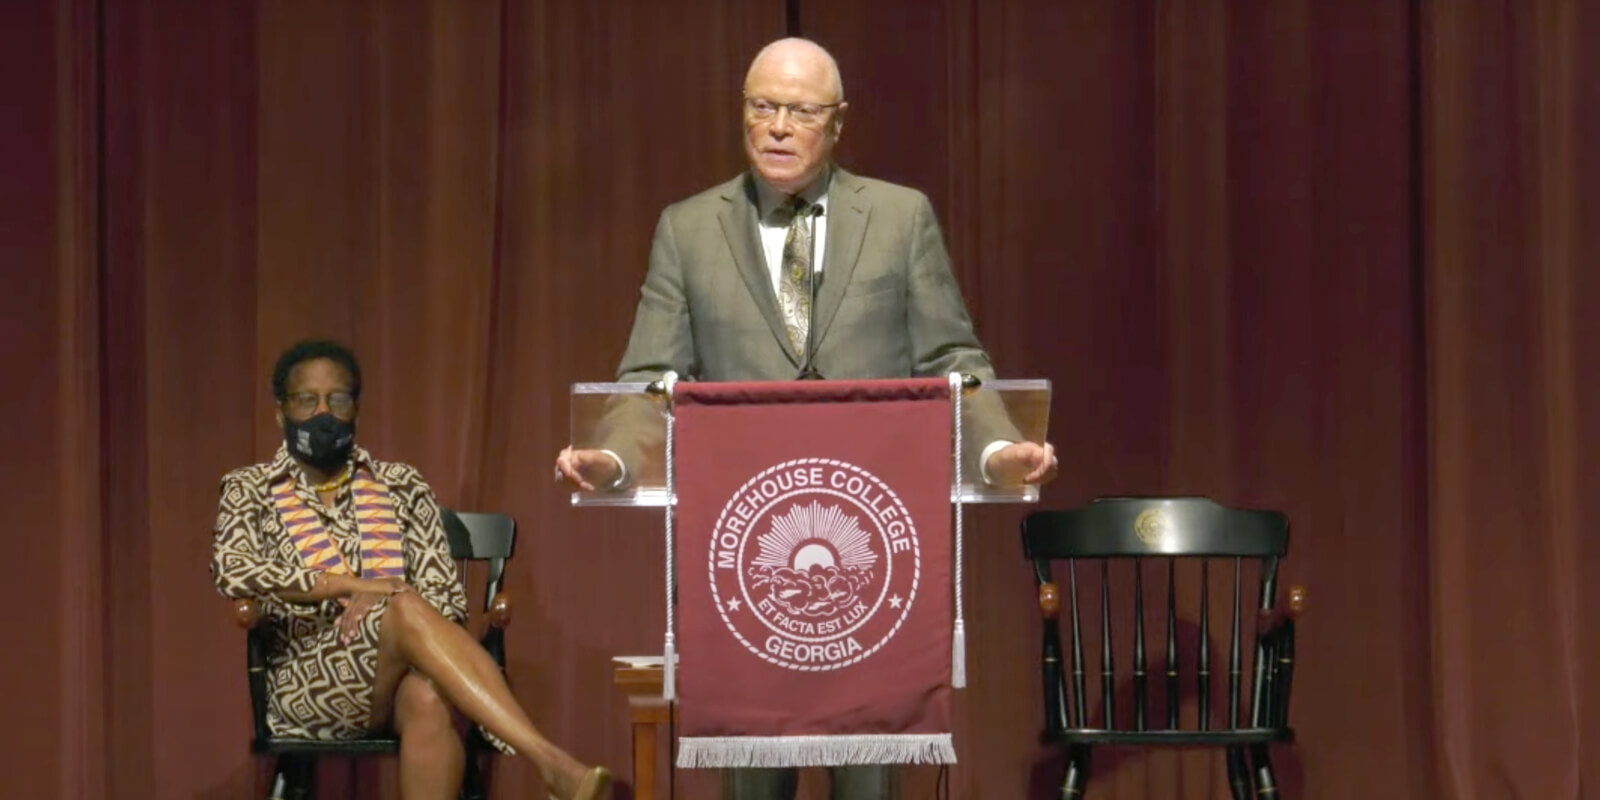 At Morehouse College, AFSCME’s Saunders urges students to be part of social change